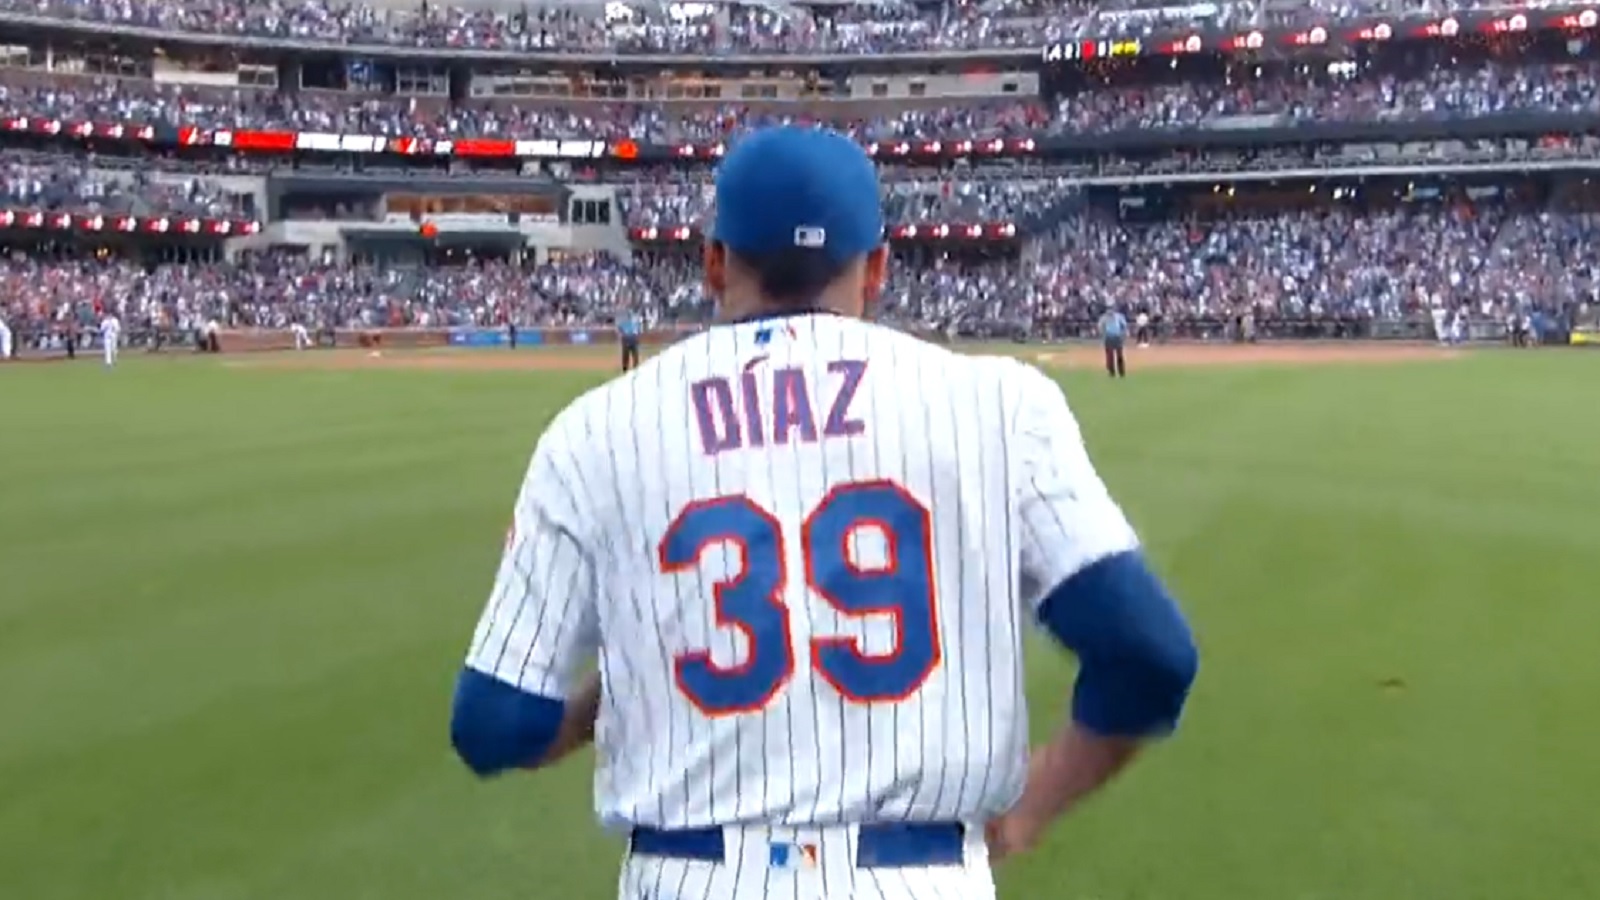 Moose on the Loose: Mets keep Edwin Diaz on bench